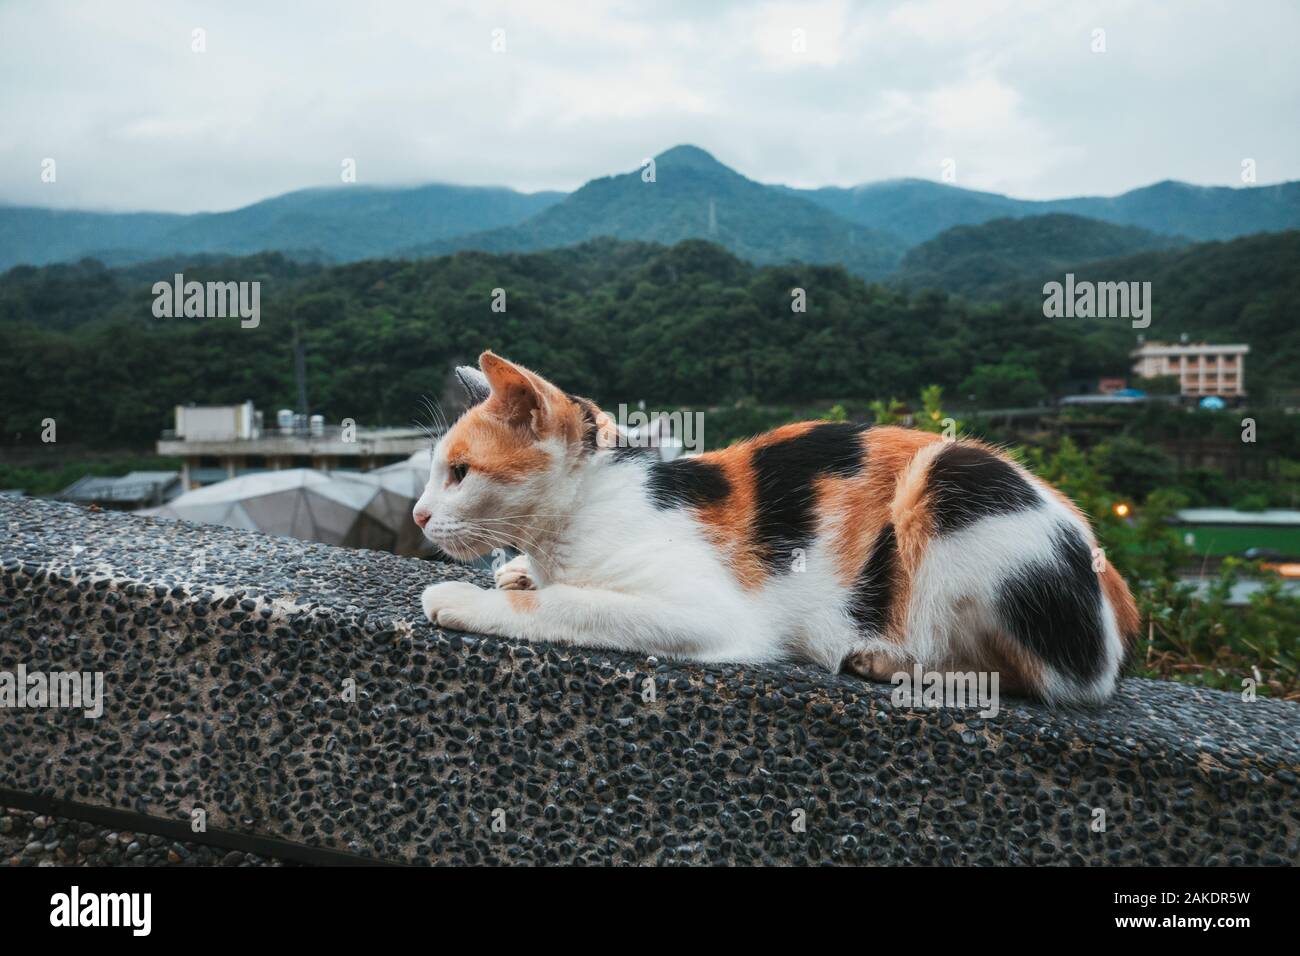 A cat perched on a ledge in Houtong Cat Village, a small village with an abundance of cats on the train line in Ruifang District, Taiwan Stock Photo